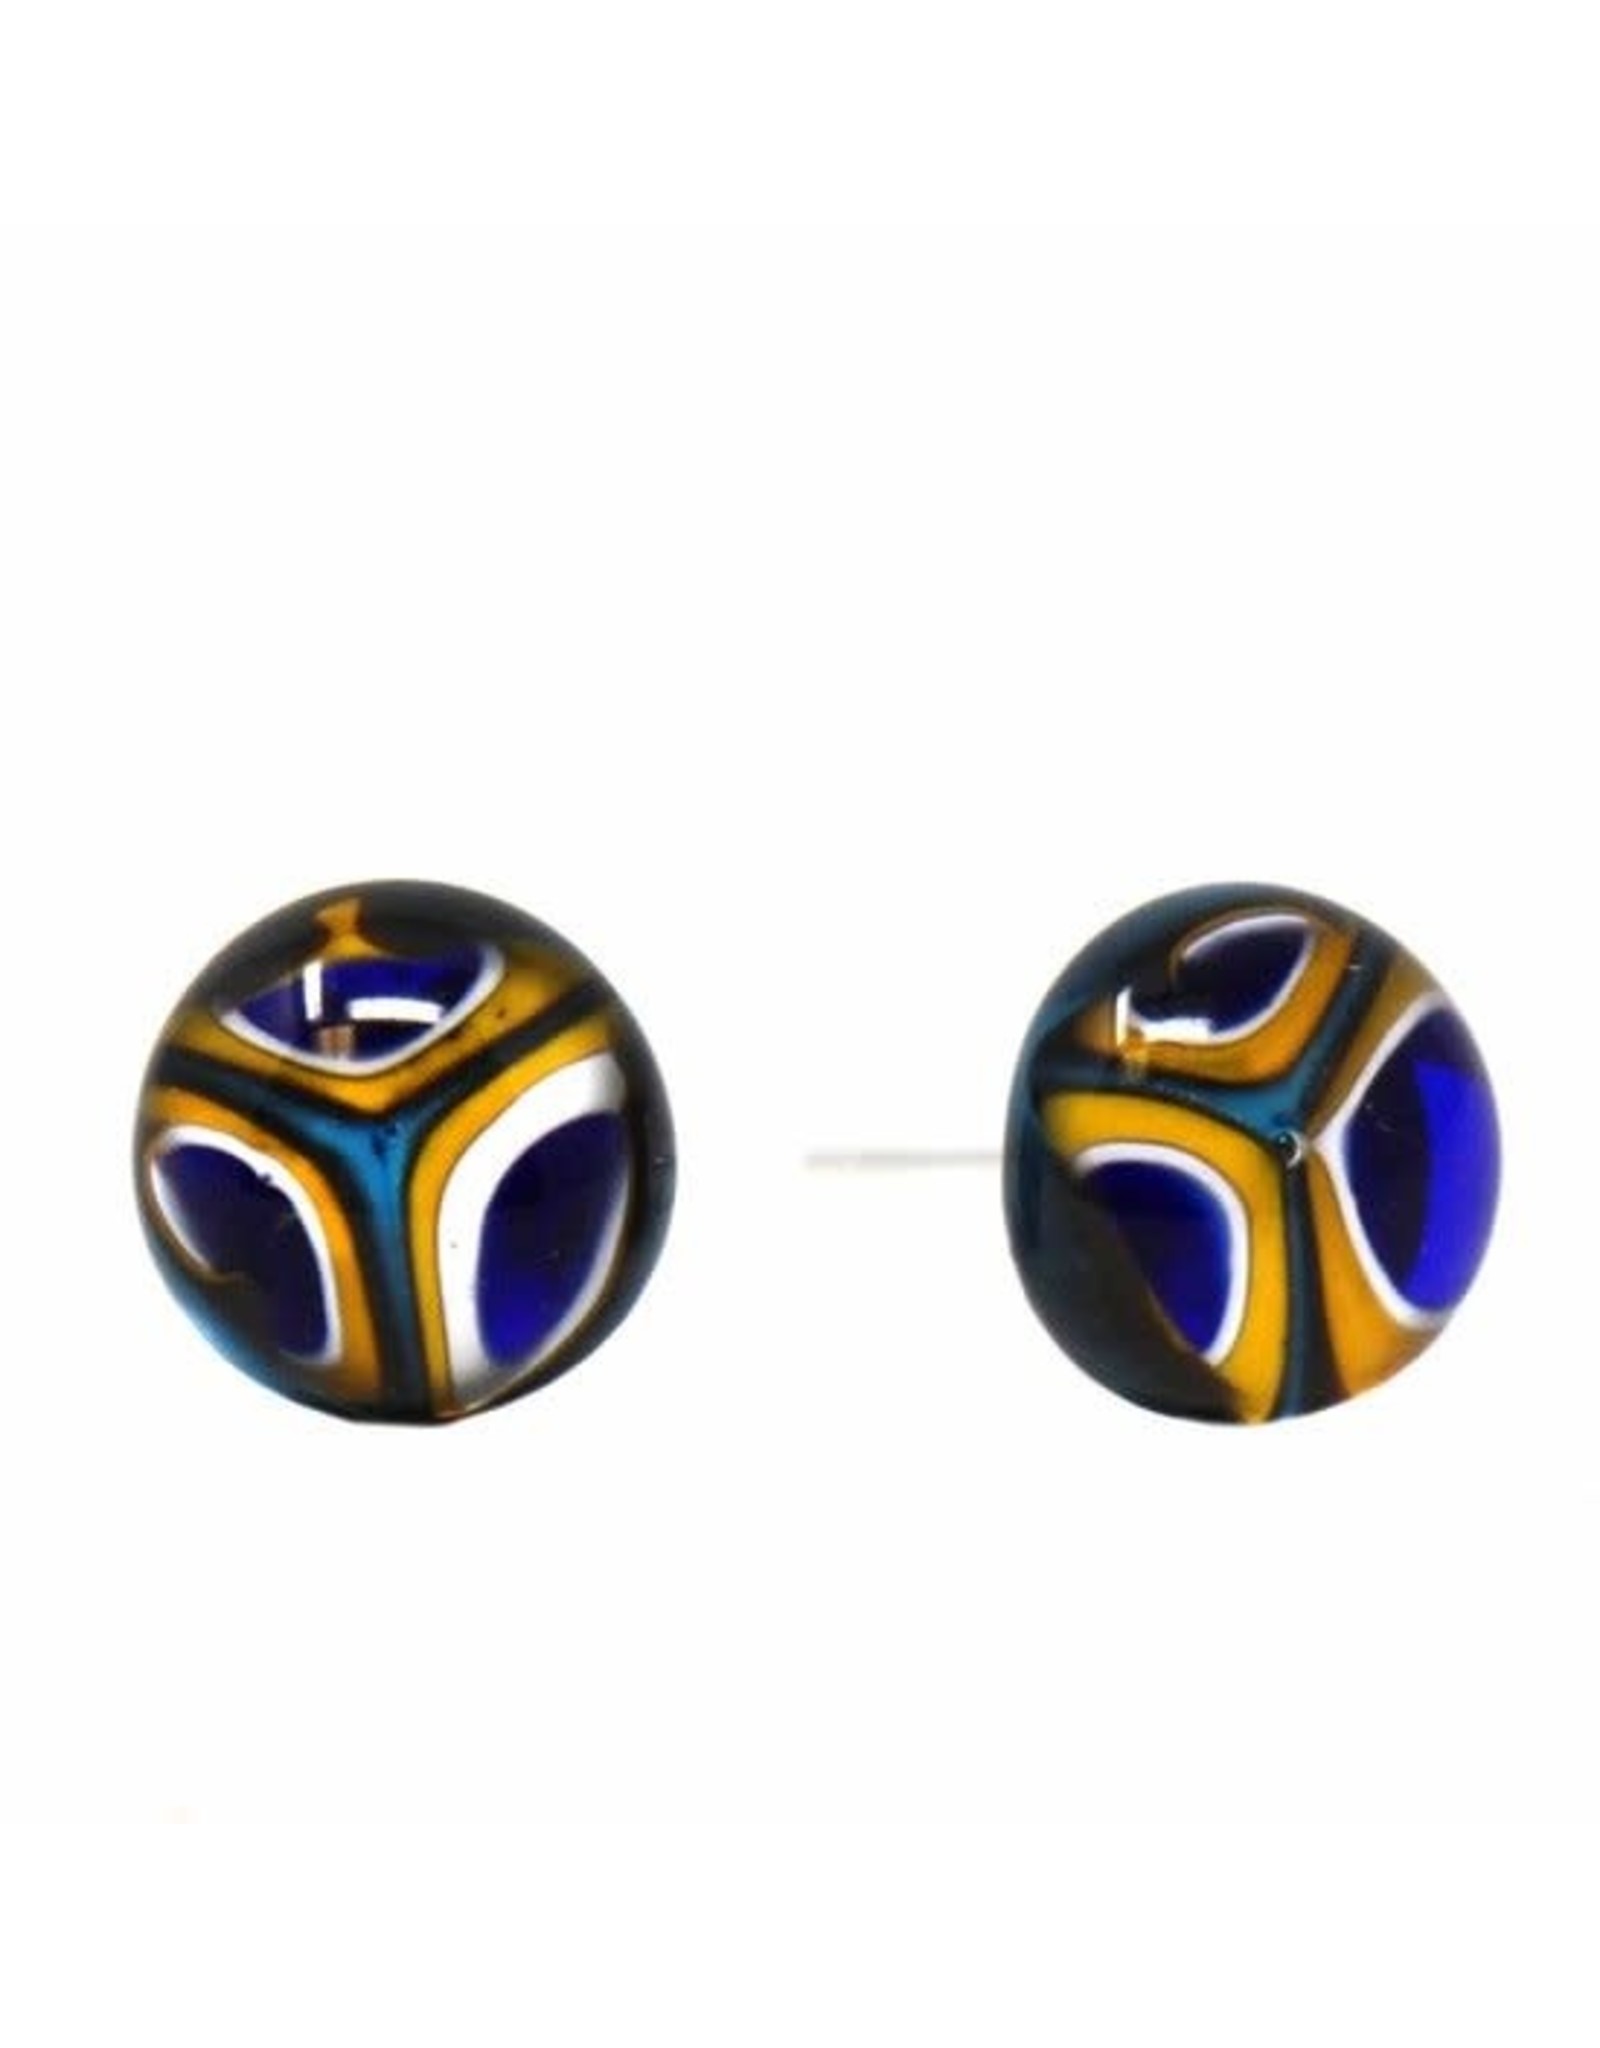 Trade roots Round Glass Stud Earrings, Blue & Yellow Kaleidoscope, Chile